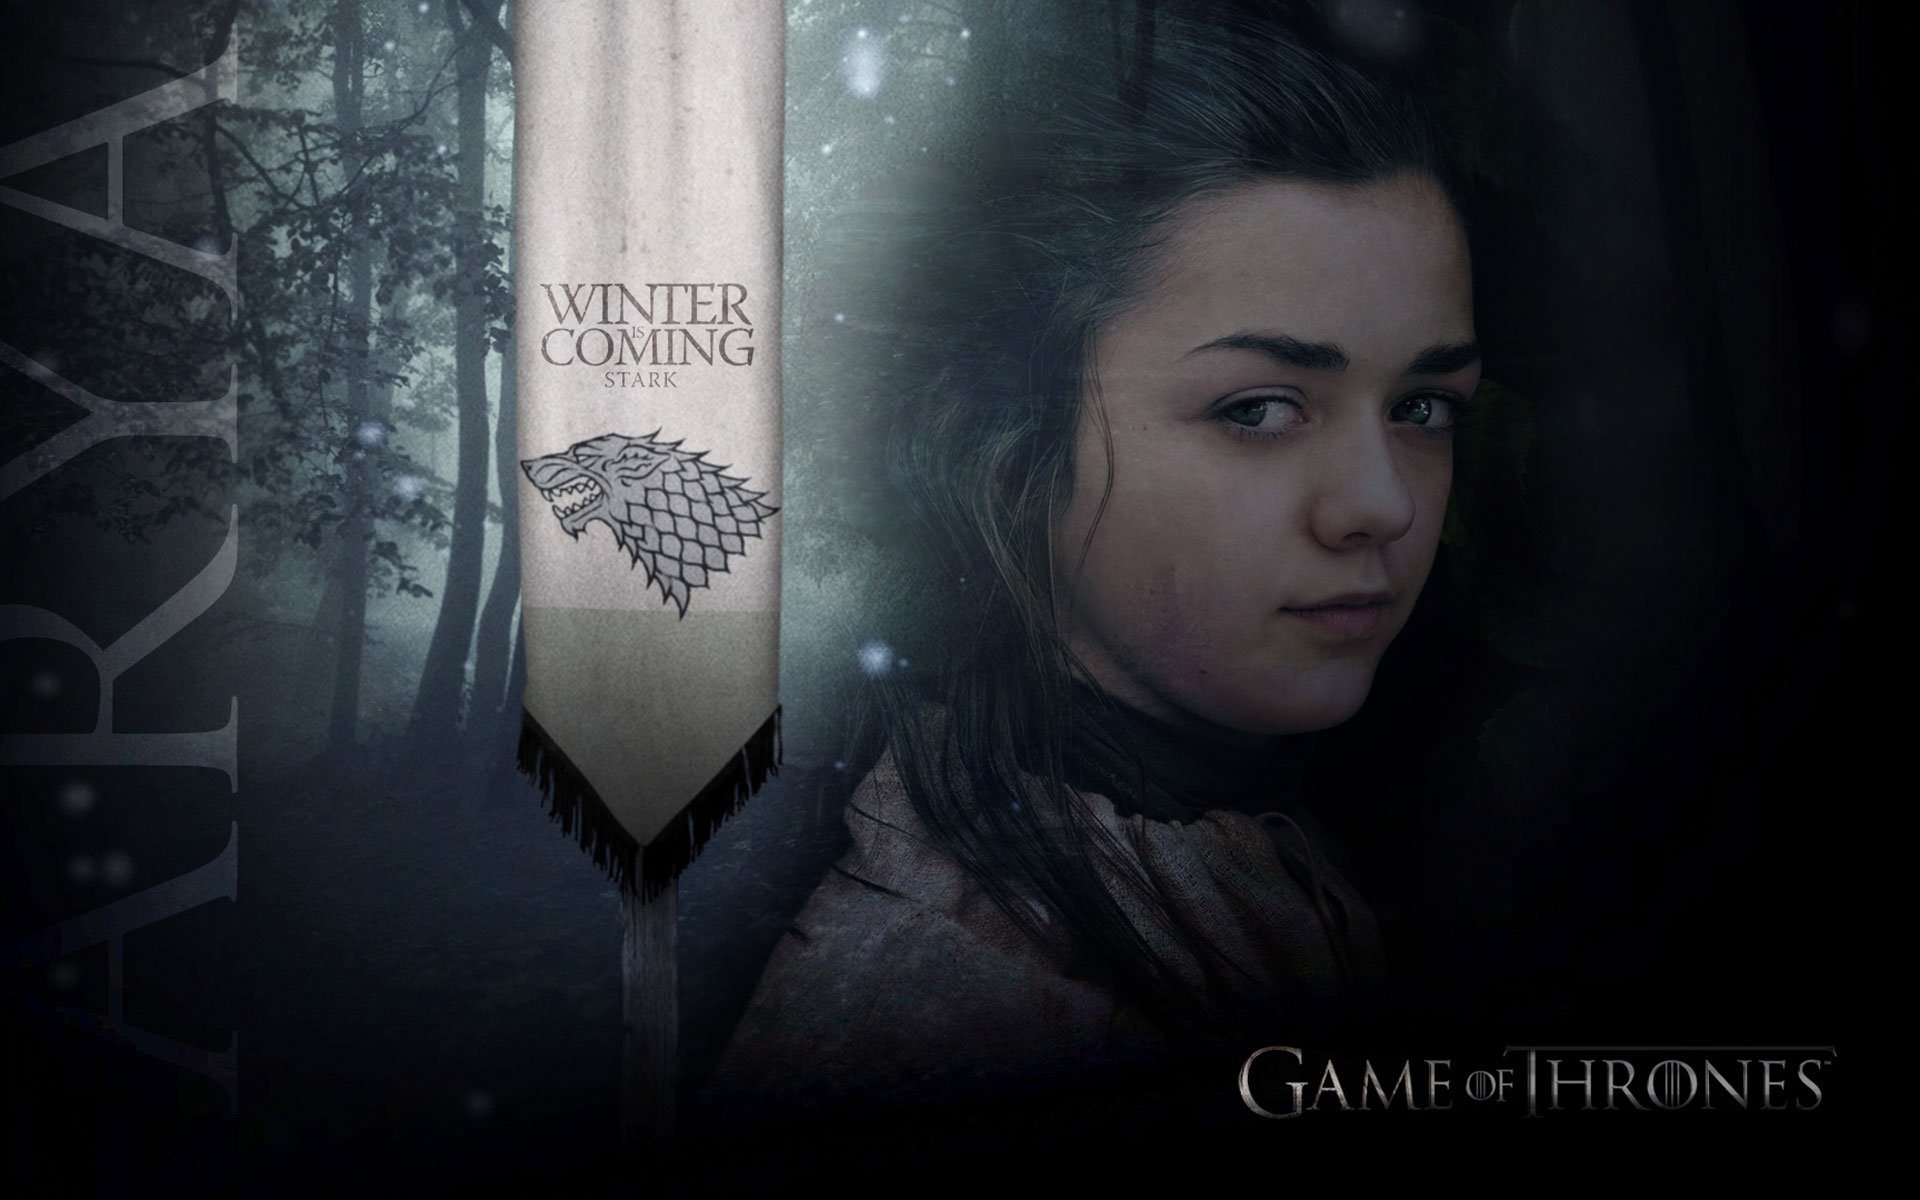 Game Of Thrones 4665 Hd Wallpapers in Games   Imagescicom 1920x1200